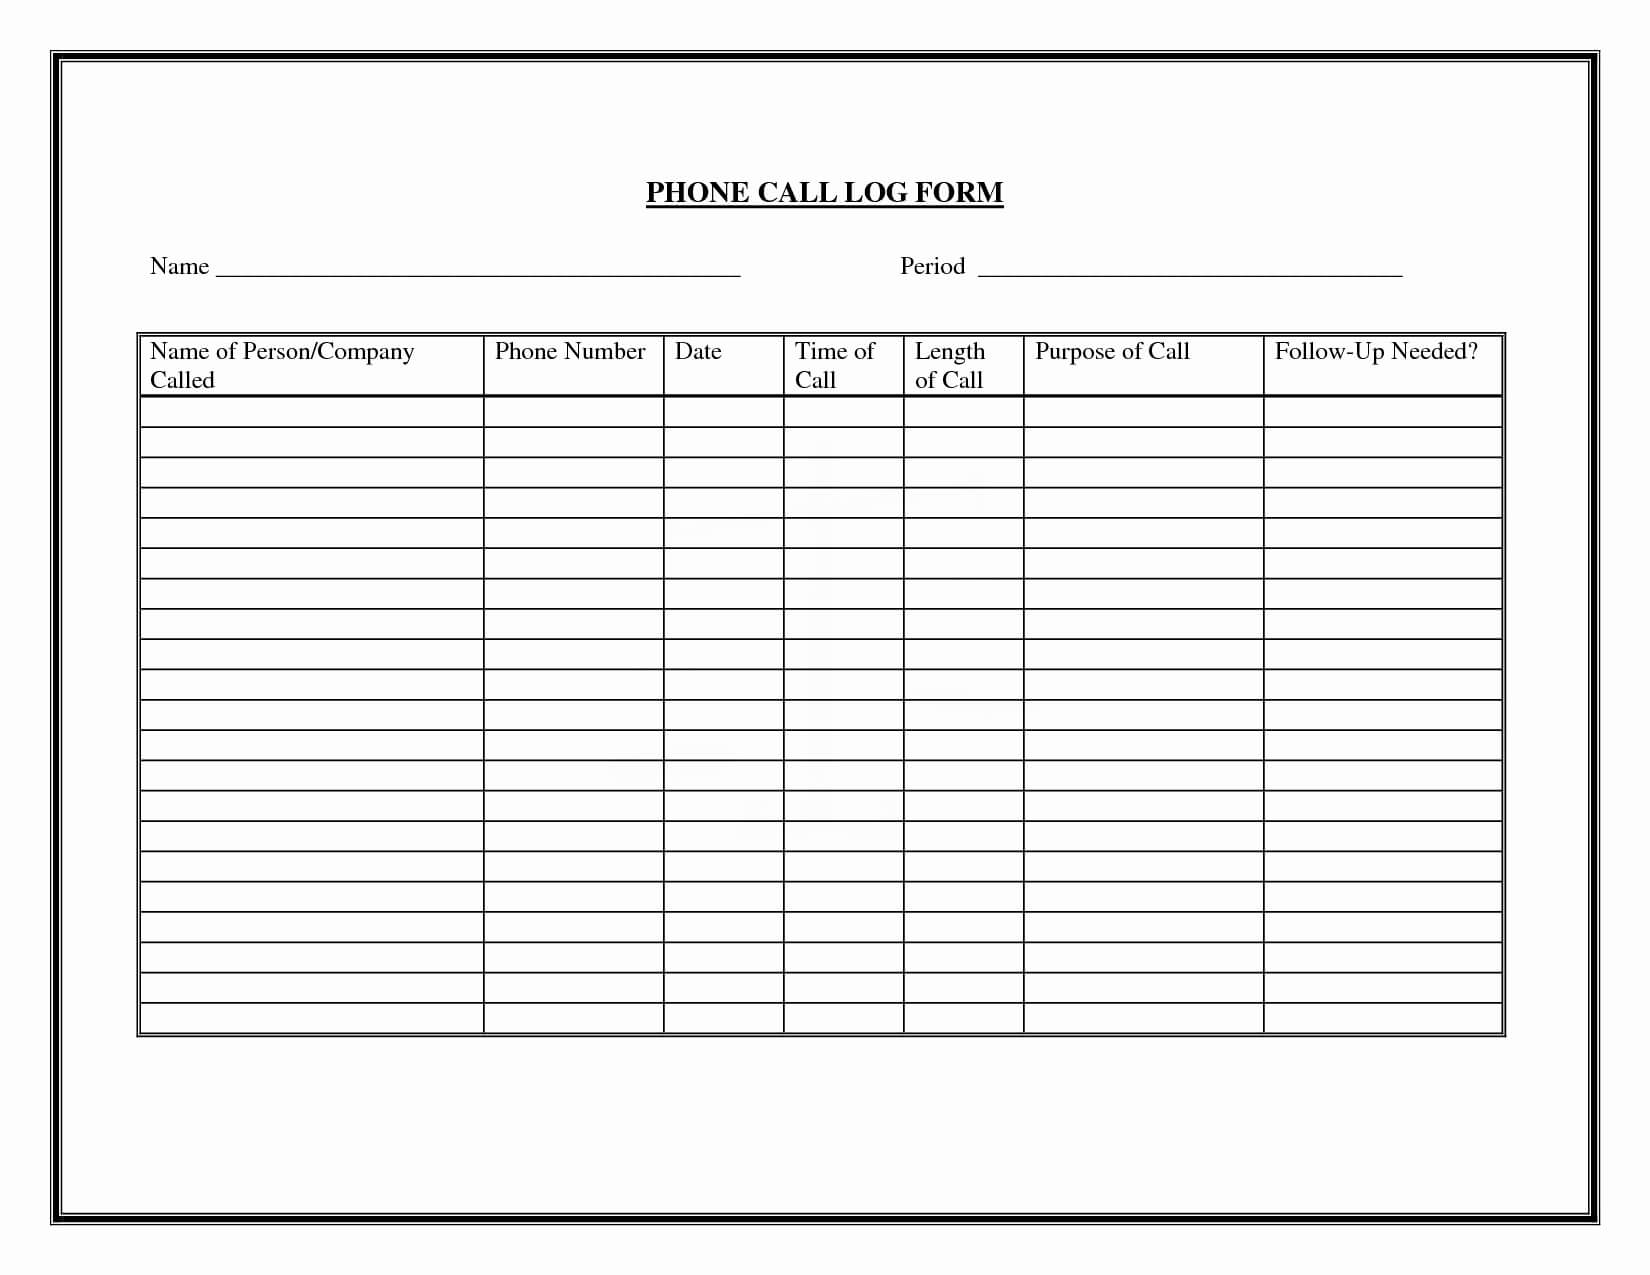 044 Sales Call Reporting Template Ideas Free Daily Report In Throughout Sales Call Reports Templates Free